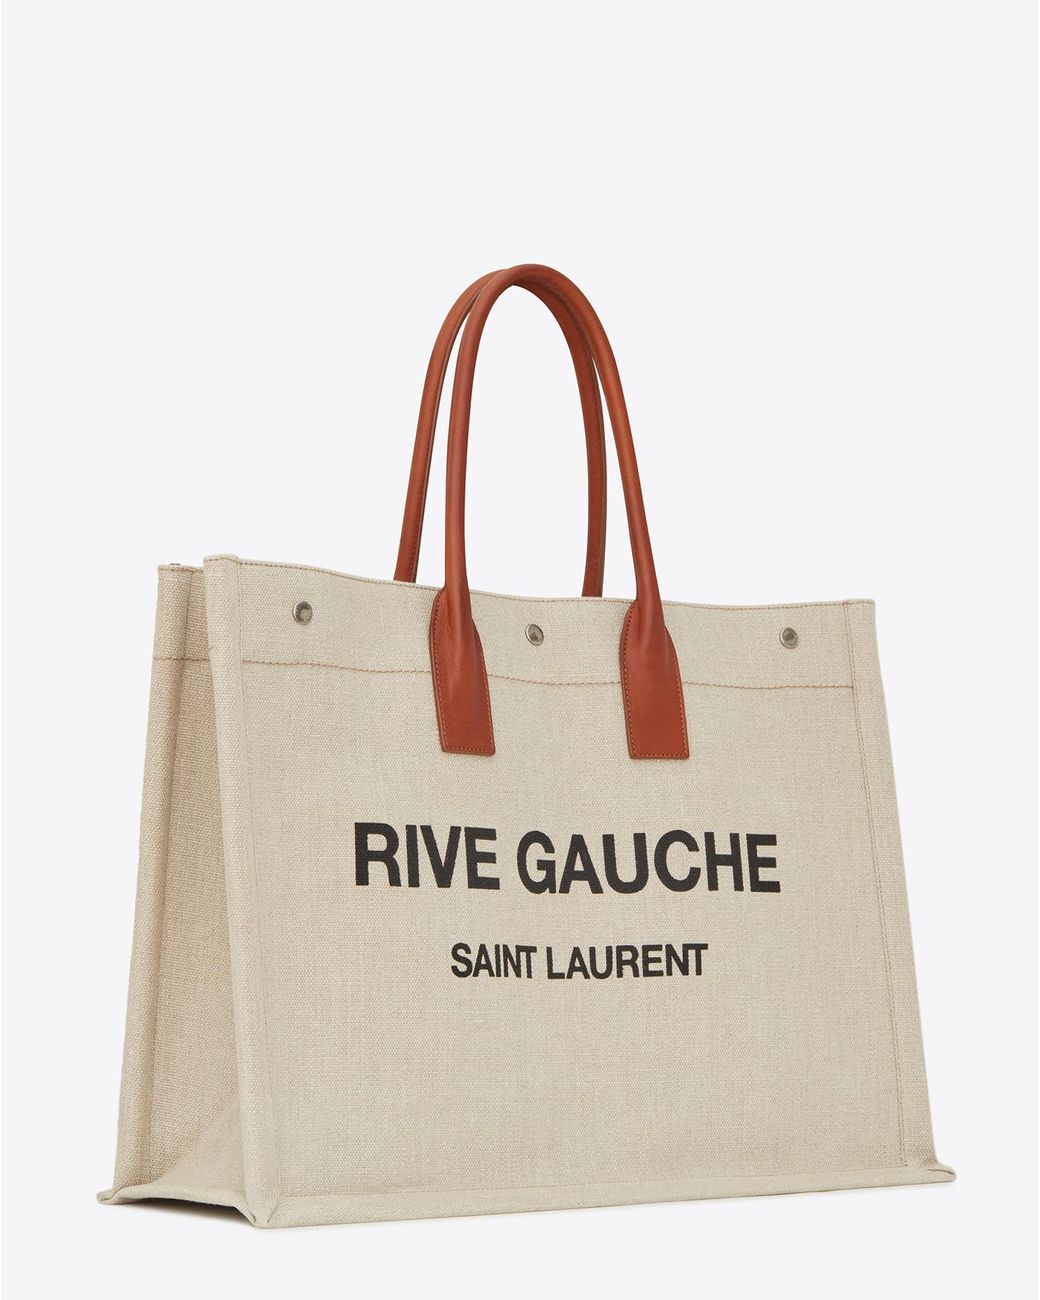 Saint Laurent Rive Gauche Tote Bag Small Neutrals in Fabric with